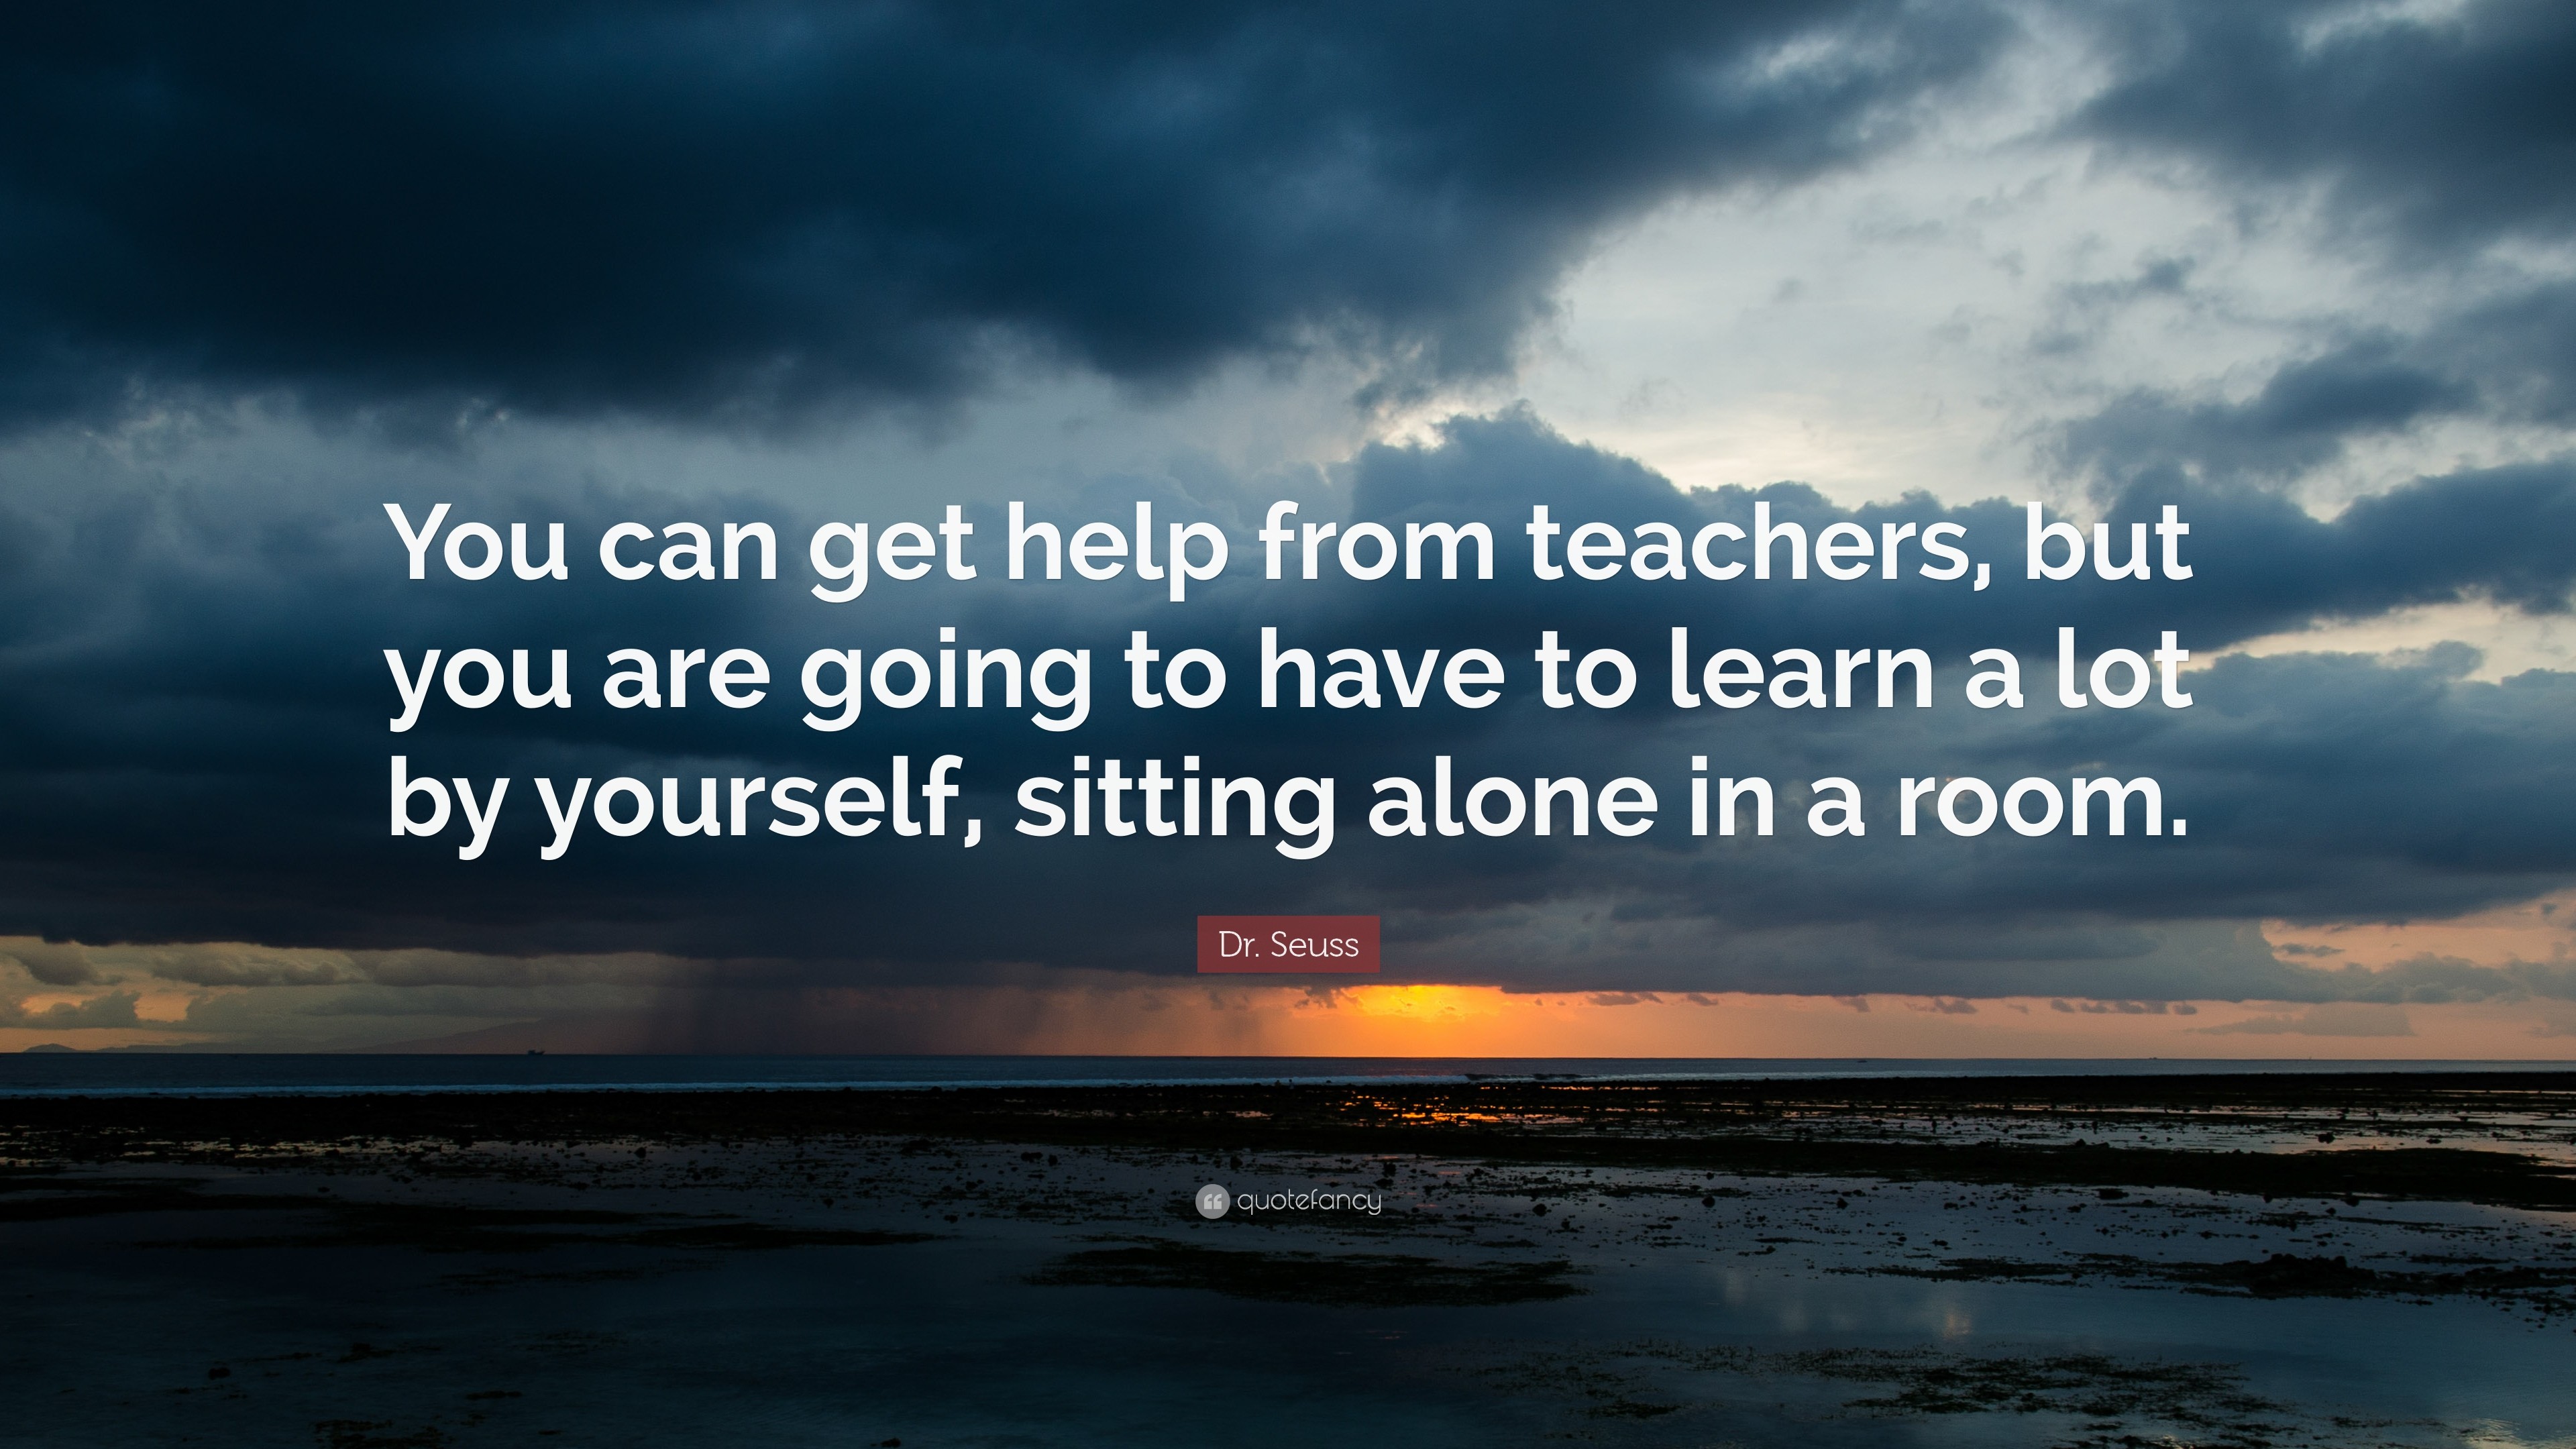 3840x2160 Dr. Seuss Quote: “You can get help from teachers, but you are